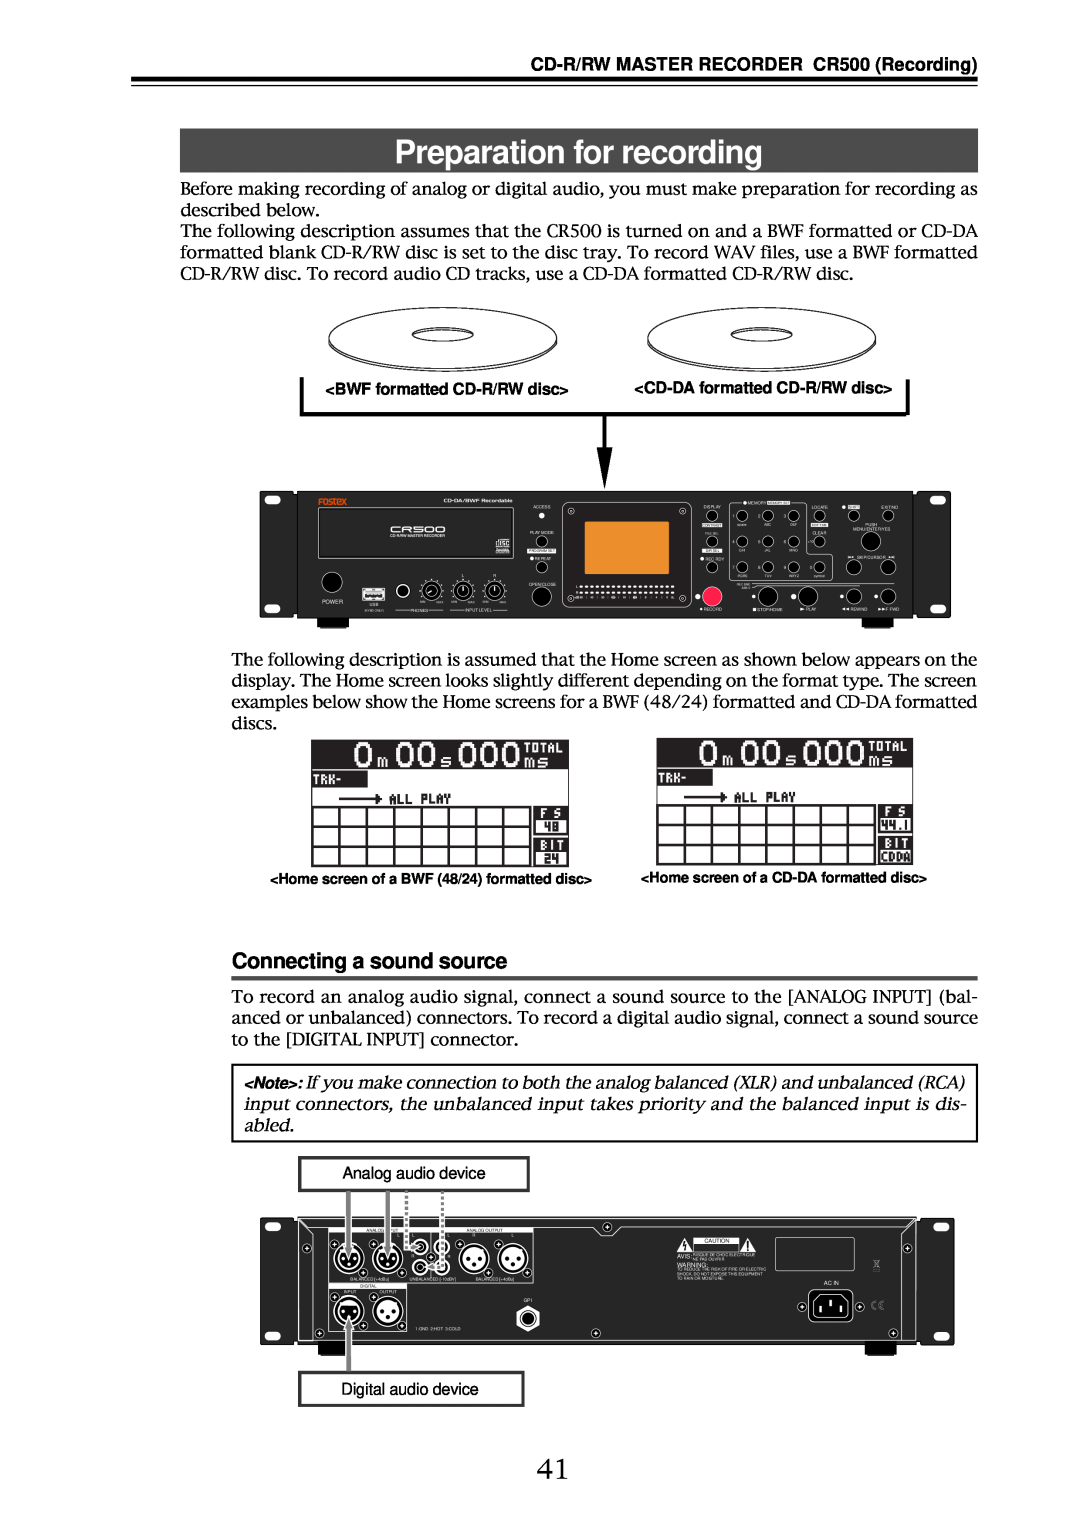 Fostex owner manual Preparation for recording, Connecting a sound source, CD-R/RWMASTER RECORDER CR500 Recording 